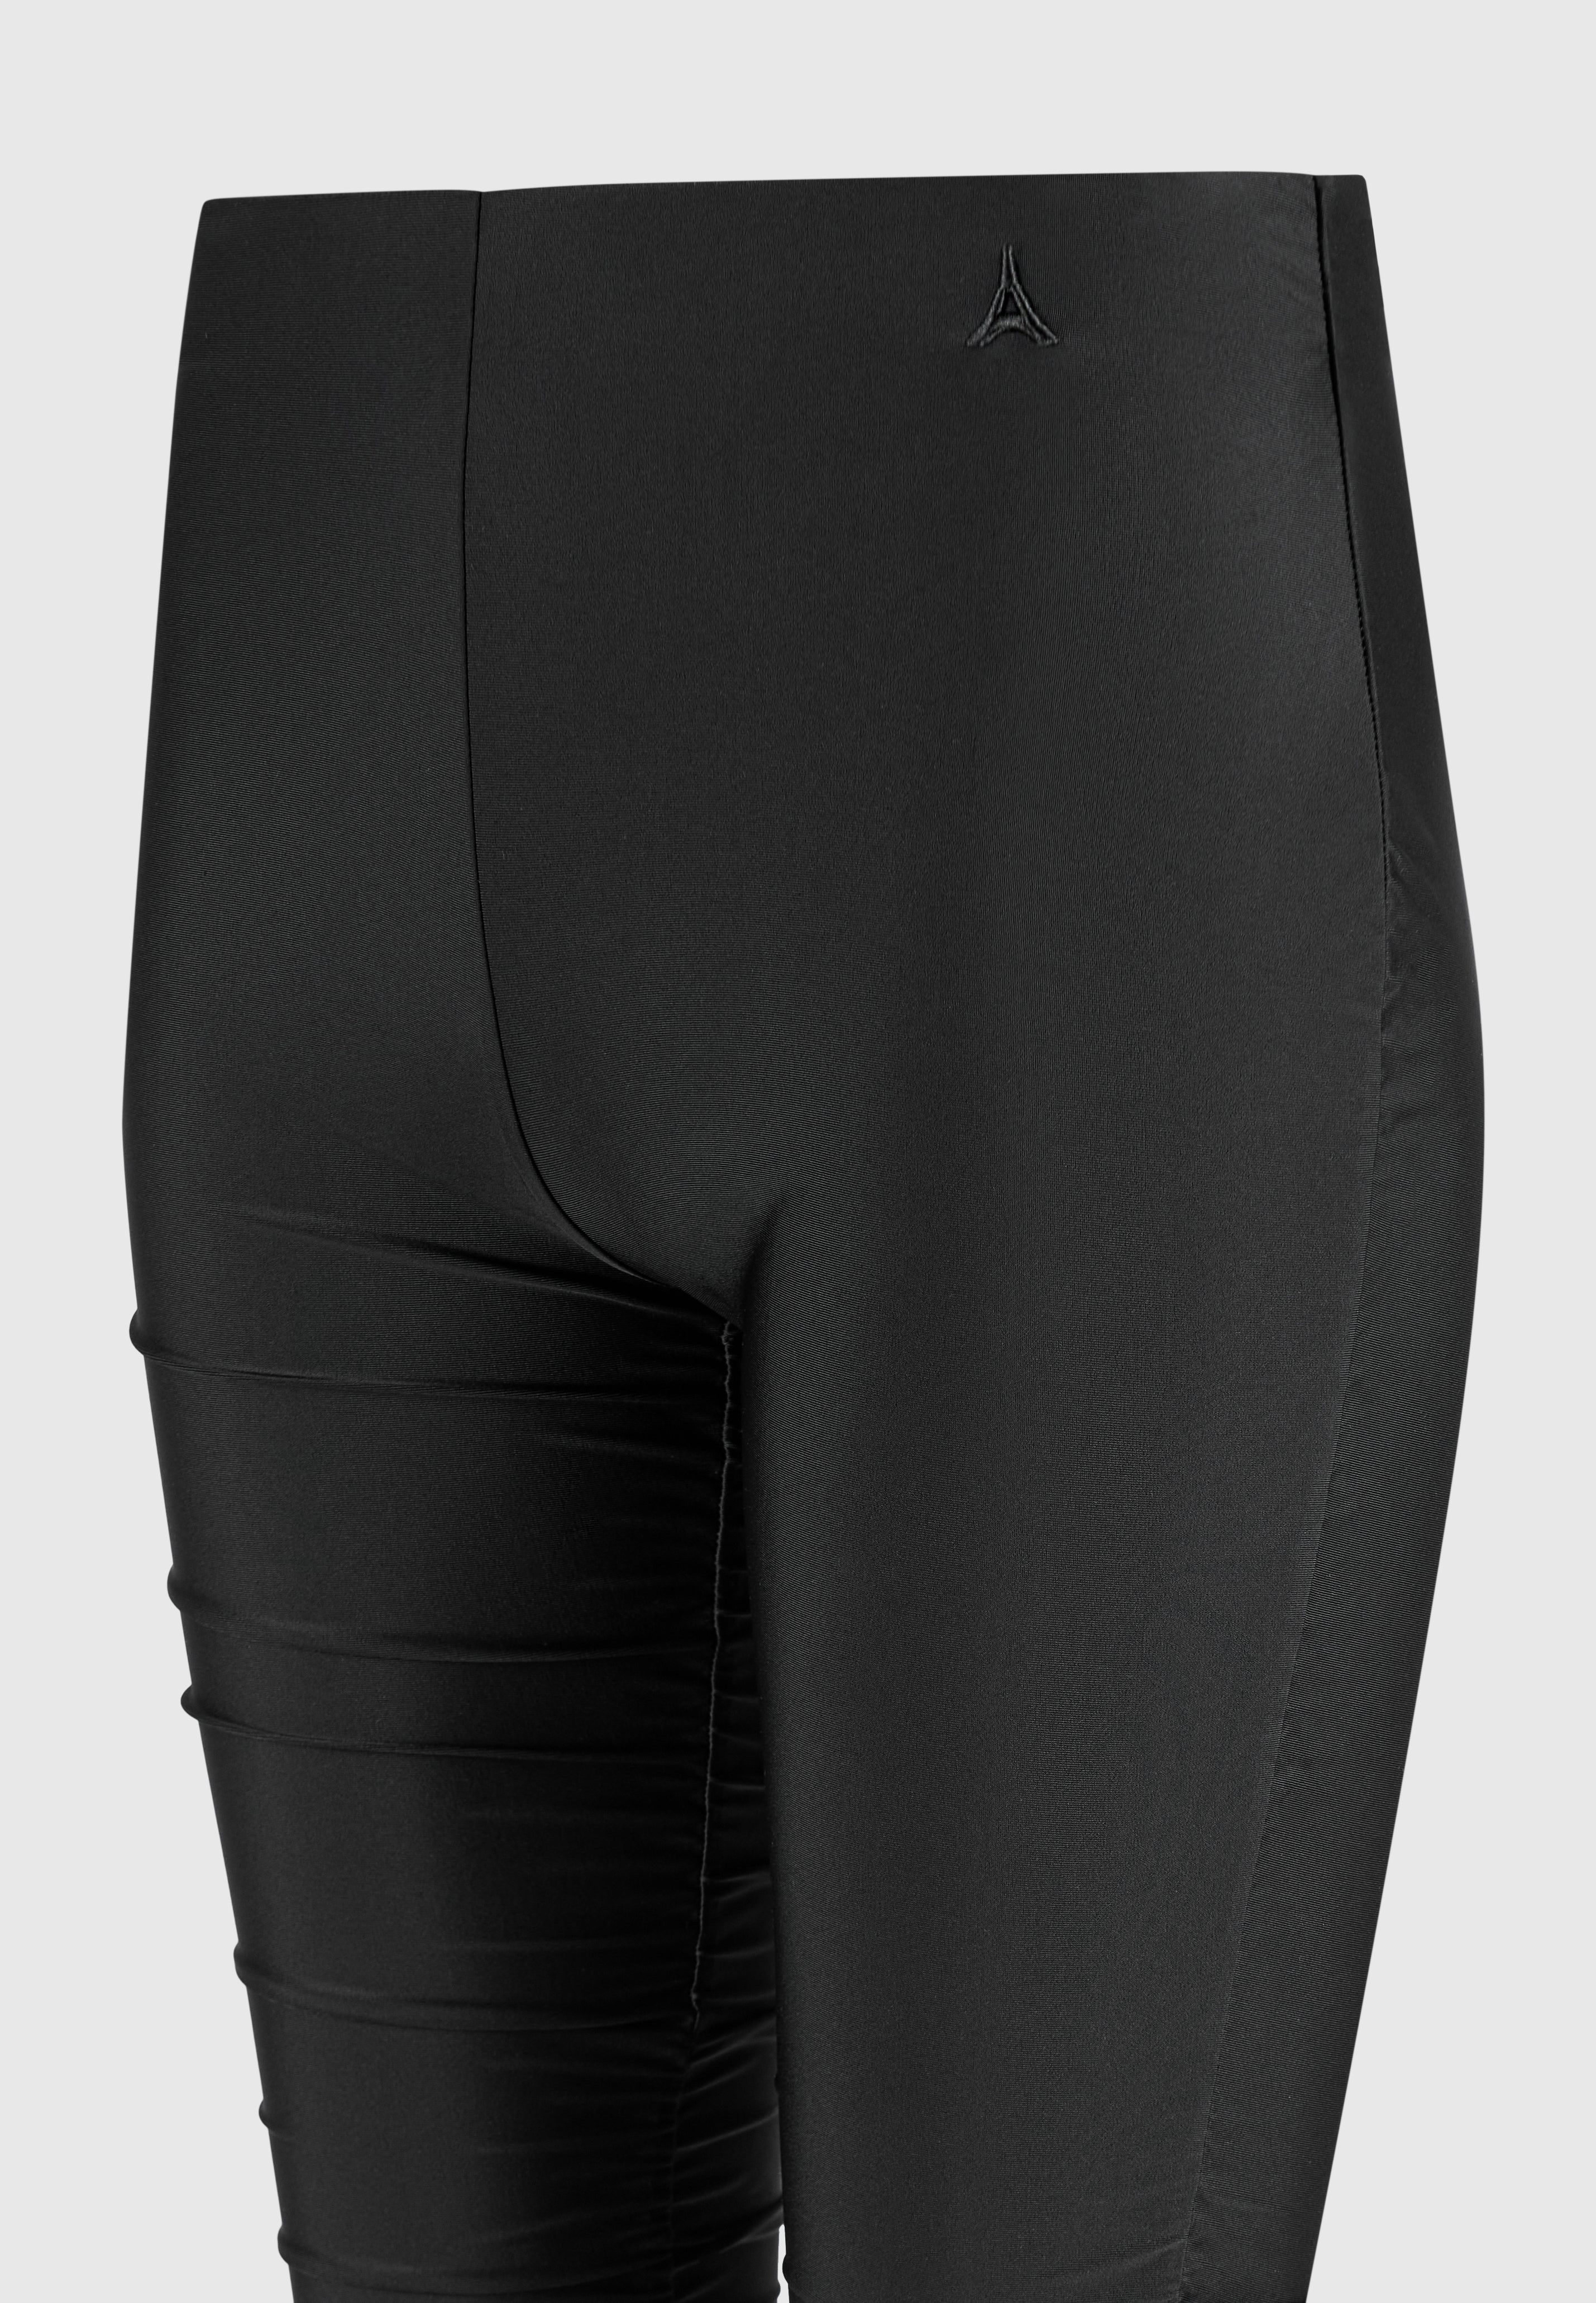 ruched-fit-and-flare-leggings-black